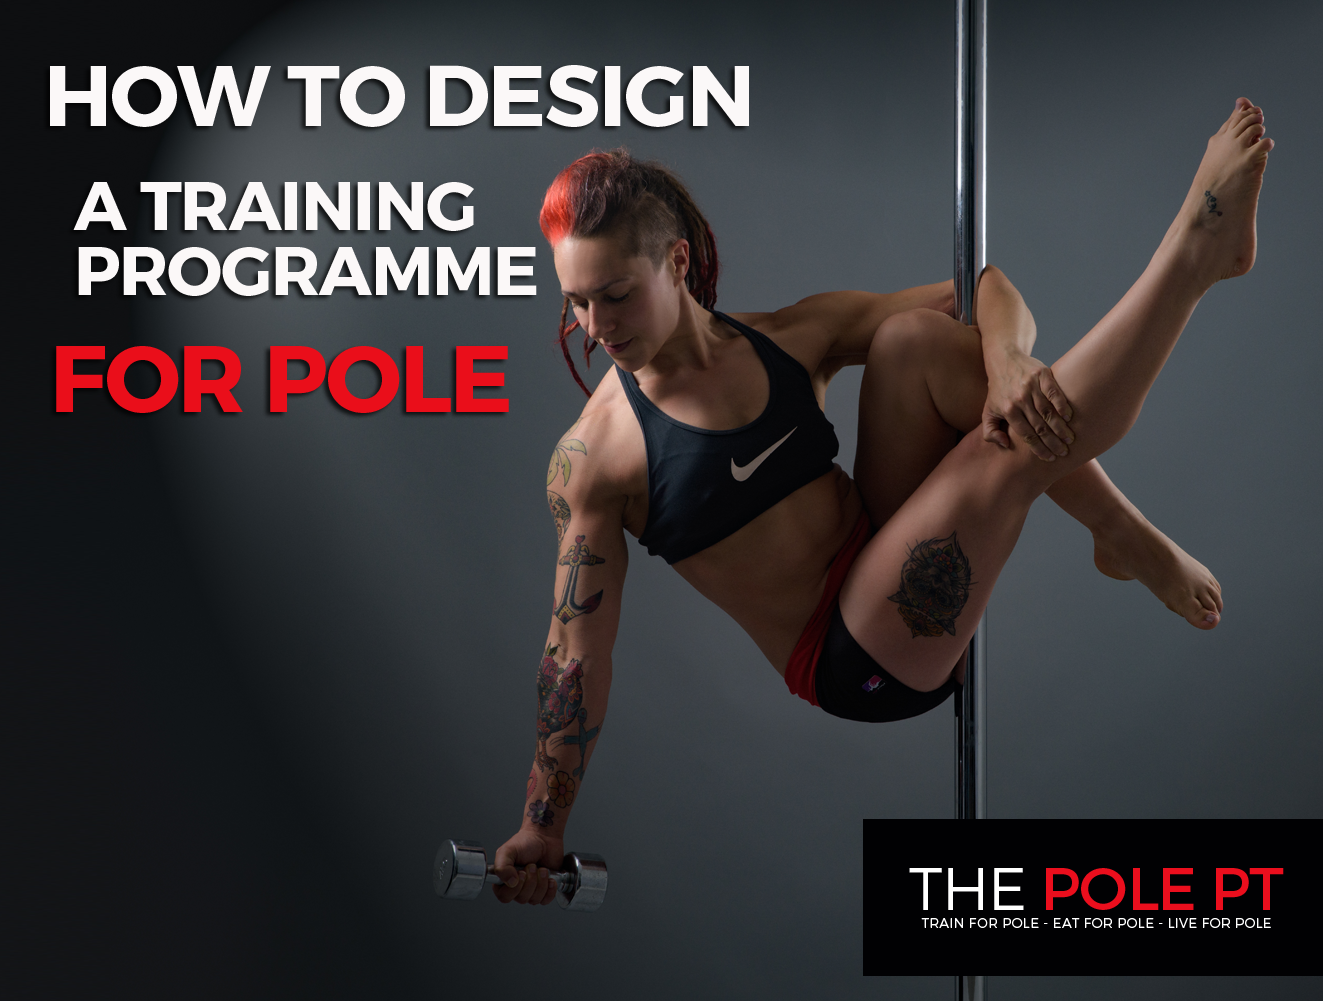 How to design a training programme to be a better pole dancer